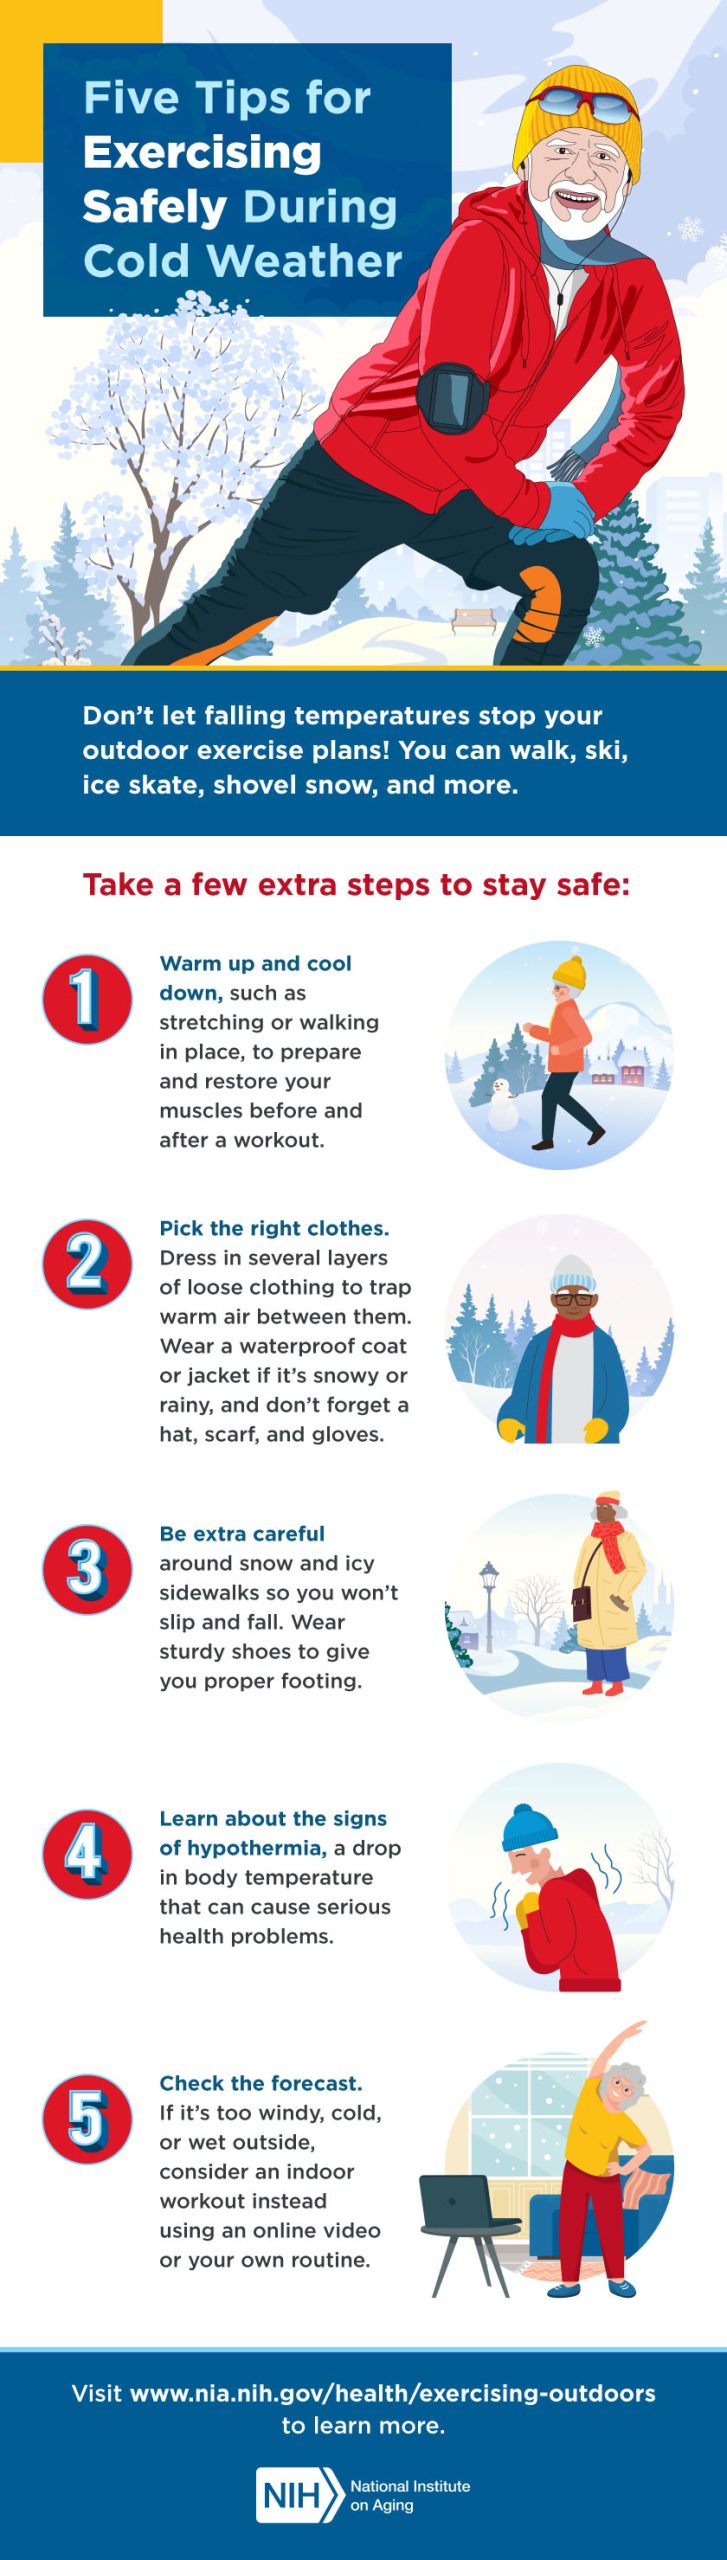 cold weather exercise tips scaled